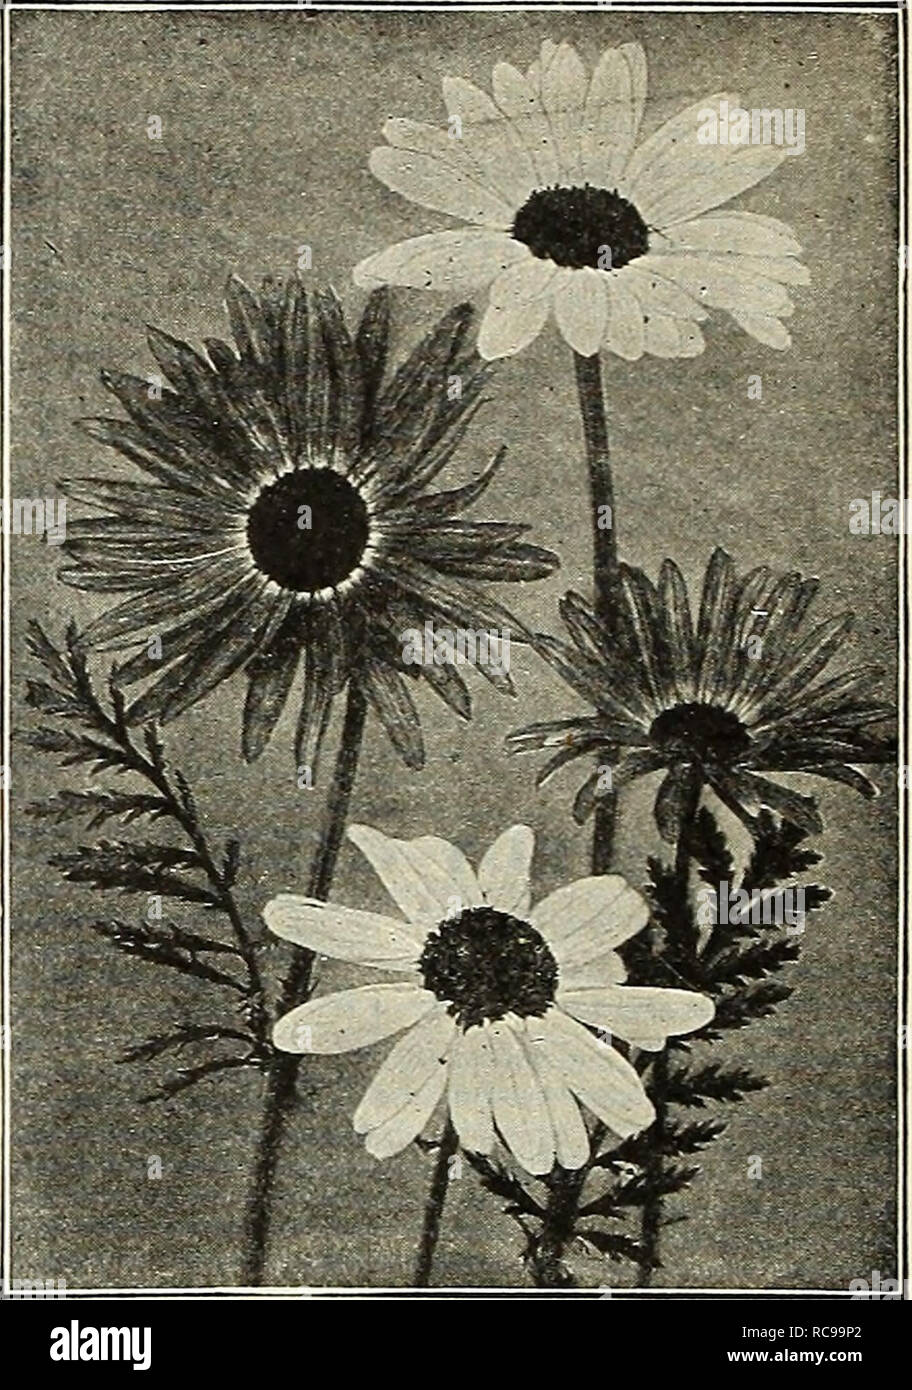 . Dreer's garden book 1923. Seeds Catalogs; Nursery stock Catalogs; Gardening Equipment and supplies Catalogs; Flowers Seeds Catalogs; Vegetables Seeds Catalogs; Fruit Seeds Catalogs. 192 /flEHPJ^AJimti^PijtimiliJfel^yik^^Hl^ POTENTILLA (Cinquifoii) Charming plants for the border, with brilHant single or double flowers that are produced in profusion from June to August; succeeds in any soil; 18 inches. Atrosanguinea. Rich crimson, single. Drap d'Or. Rich orange, double. Formosa. Single rosy-red. William RoUison. Mahogany suffused orange; double. 30 cts. each; S2.S0 per doz. Set of 4 for SI.00. Stock Photo